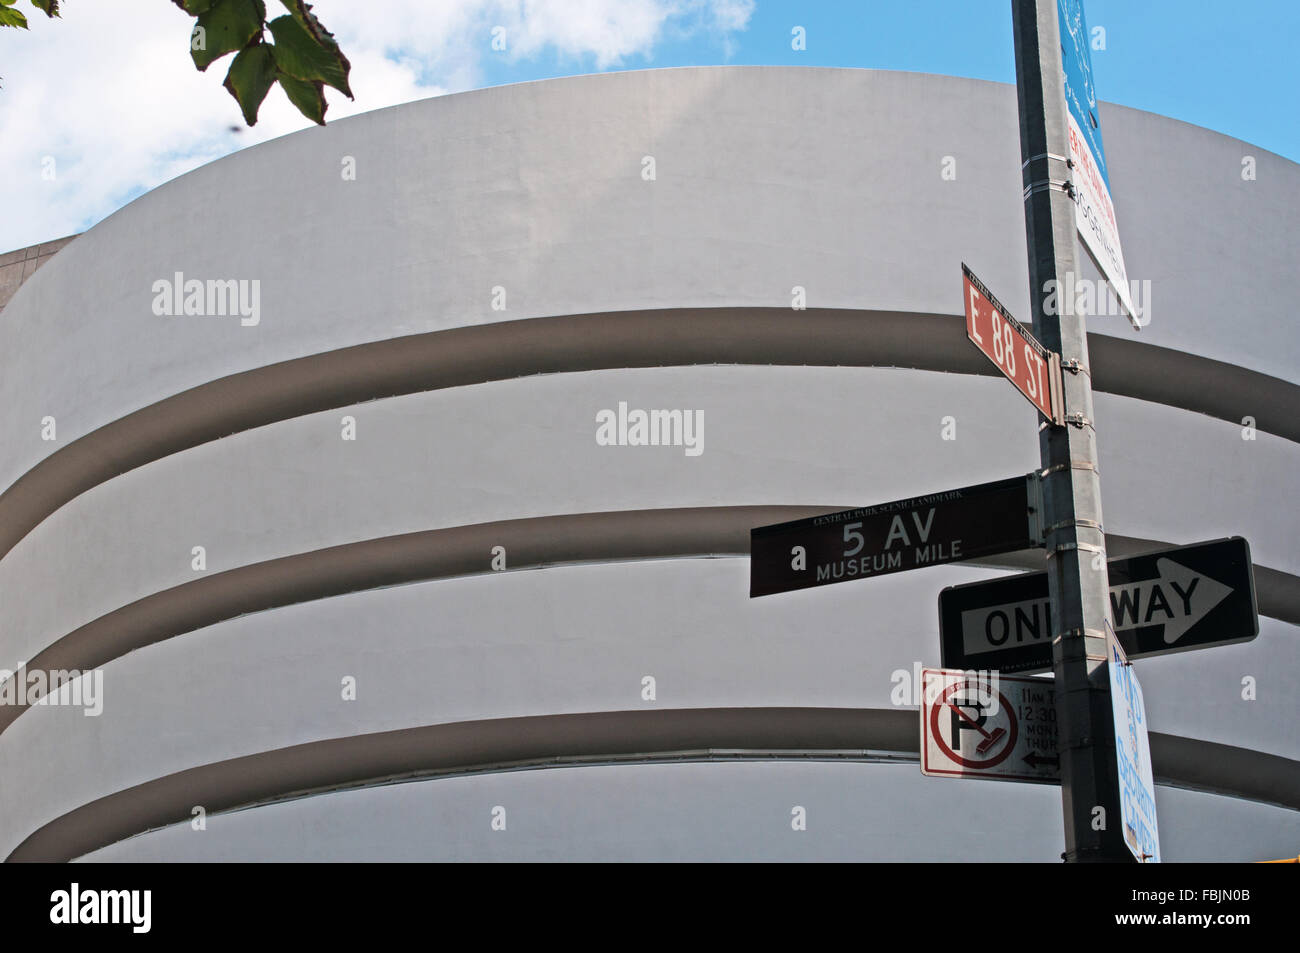 New York, United States of America: street signs and details of the Guggenheim Museum building, the iconic landmark designed by Frank Lloyd Wright Stock Photo